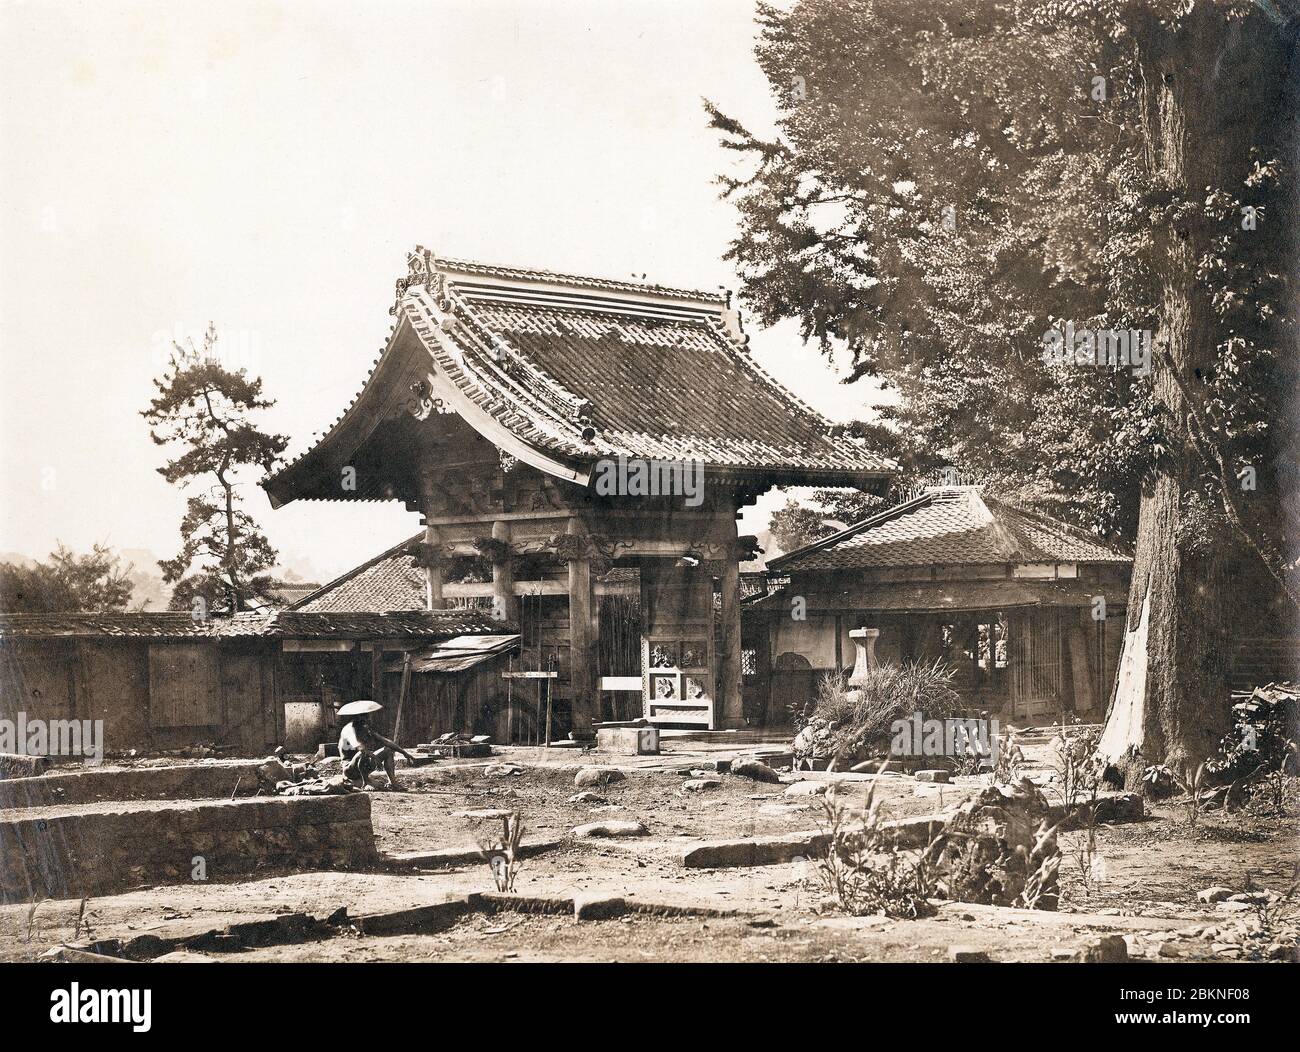 [ 1860s Japan - Burnt down American Legation in Tokyo ] —   Burnt down American Legation at Zenpukuji (善福寺) in Azabu, Tokyo.  In 1859 (Ansei 6), the Buddhist temple became the home of the first American legation in Edo. On May 24, 1863 (Bunkyu 3), several temple buildings were burned down by anti-Western samurai of the Mito Han.  This prompted the US Minister to Japan, Robert Hewson Pruyn (1815–1882), successor of US Consul Townsend Harris (1804–1878), to move to Yokohama.  19th century vintage albumen photograph. Stock Photo